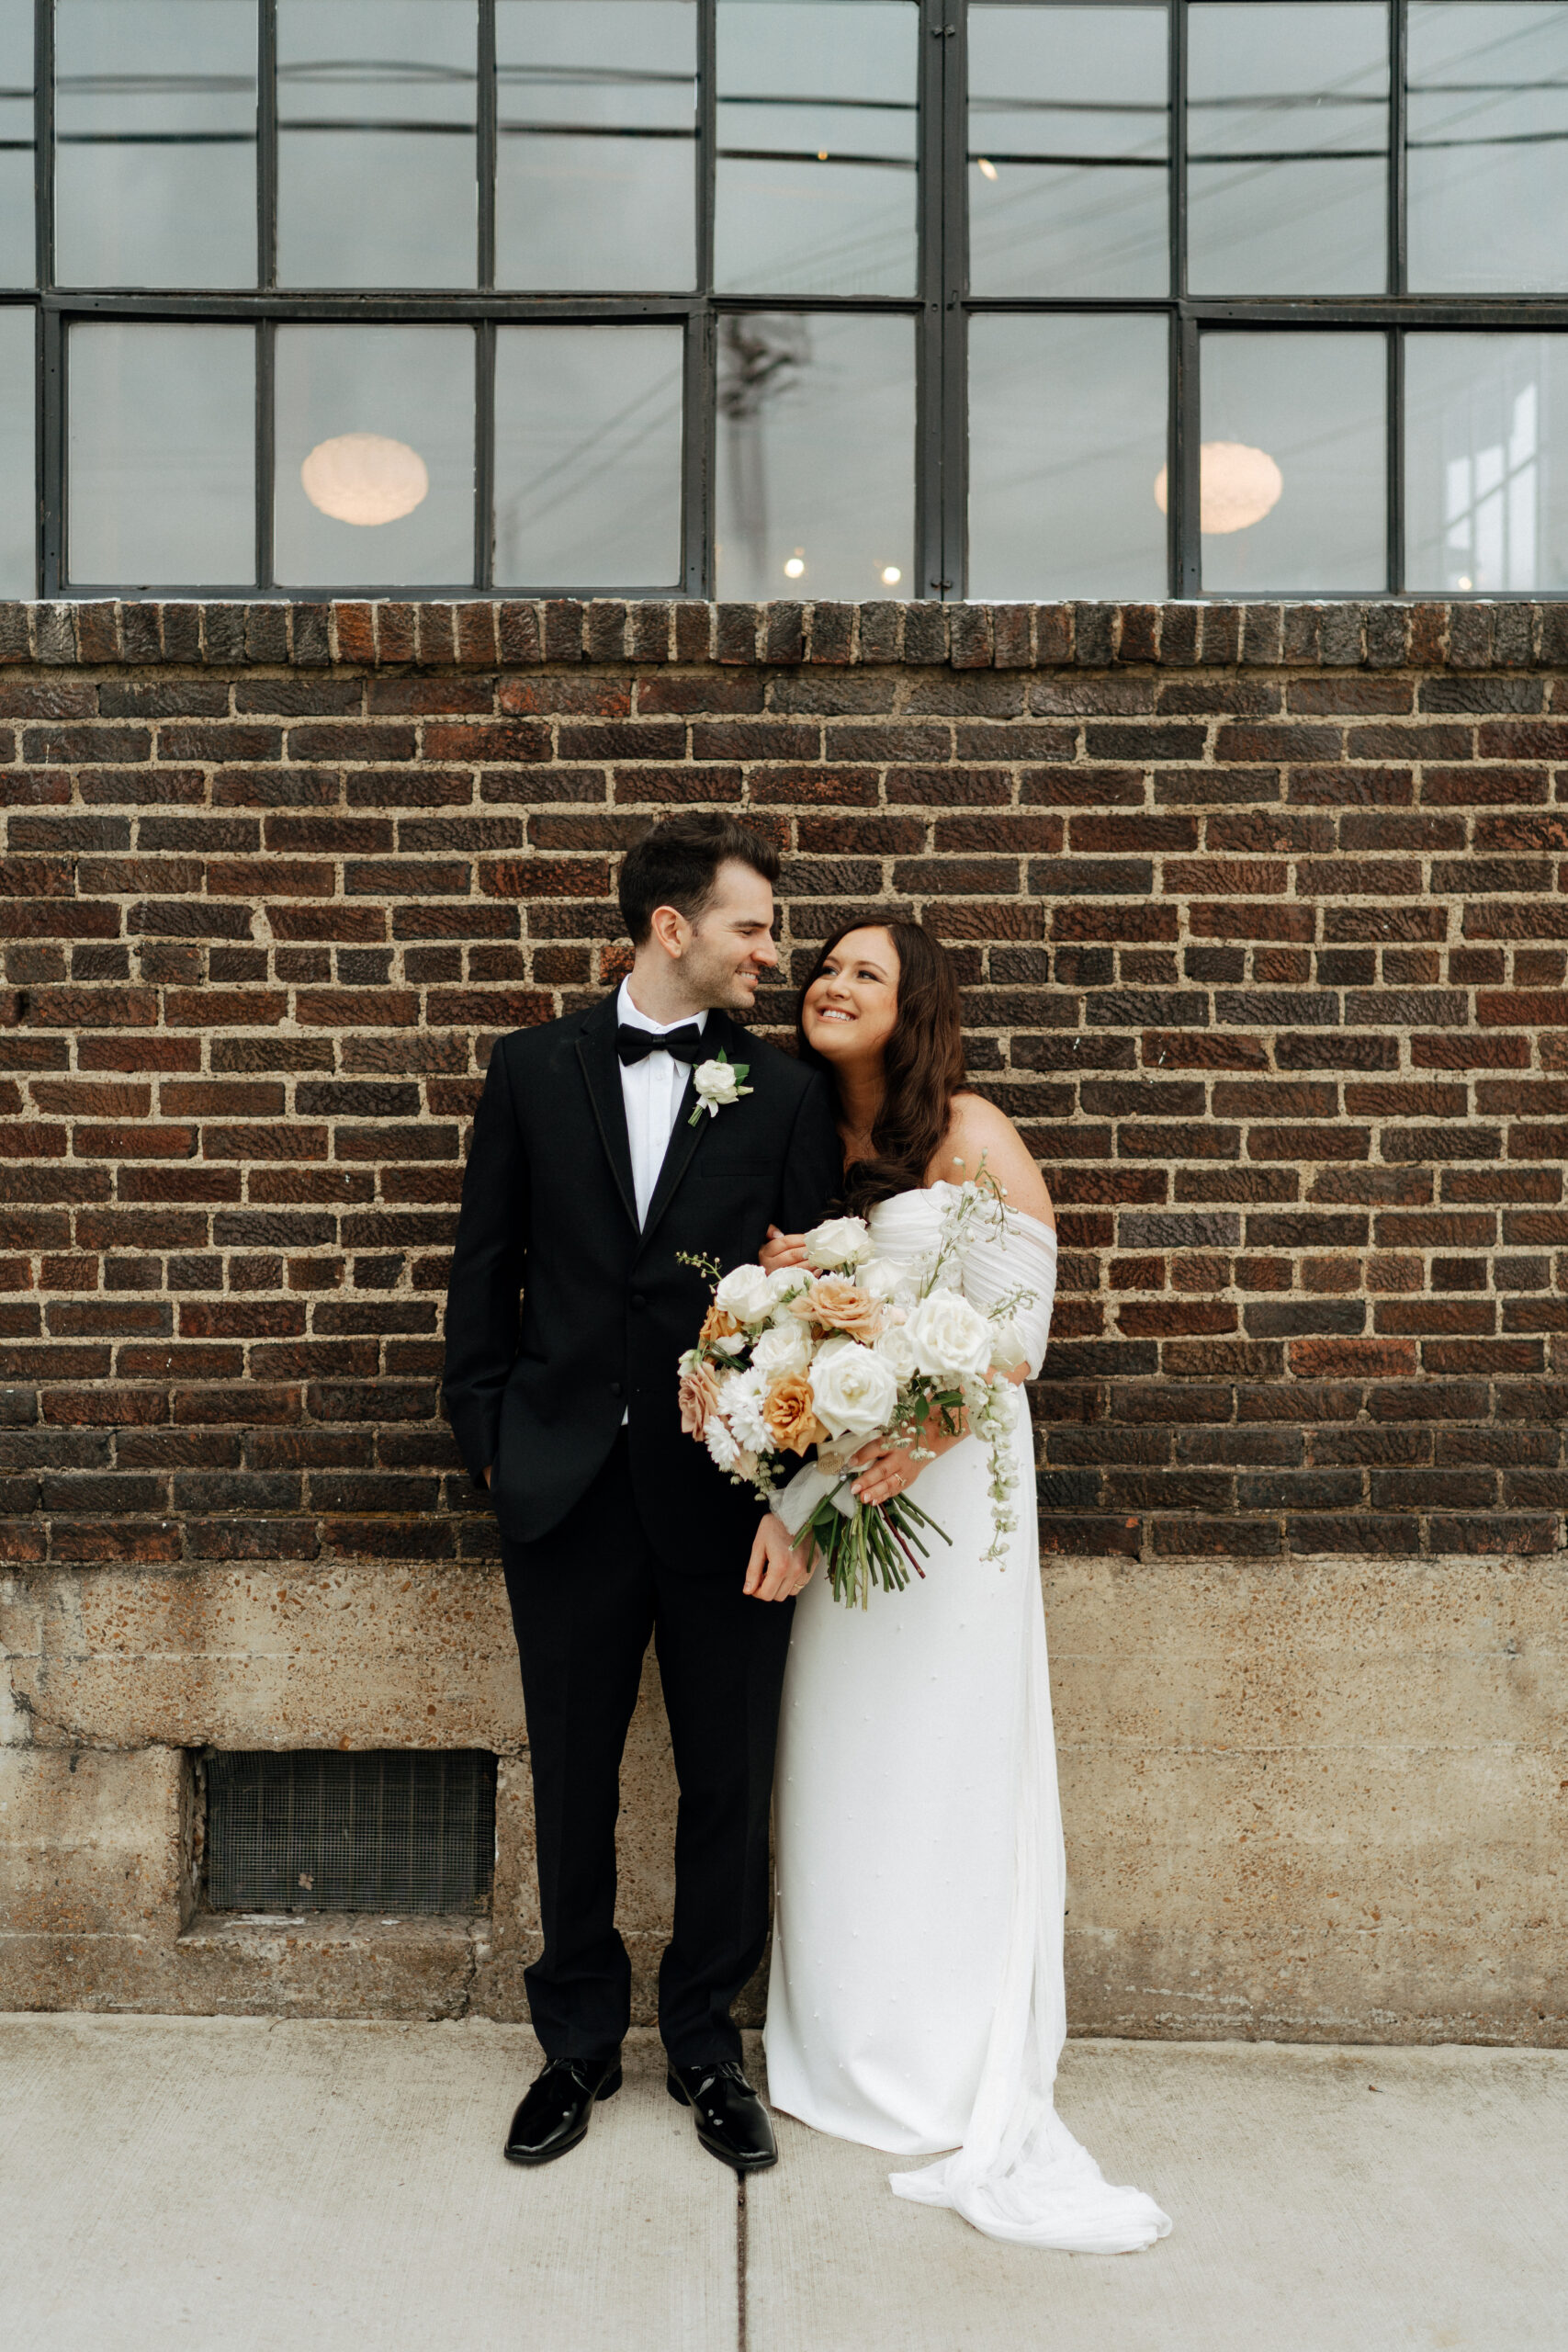 Bride and groom on their wedding day at 14TENN in Nashville, TN